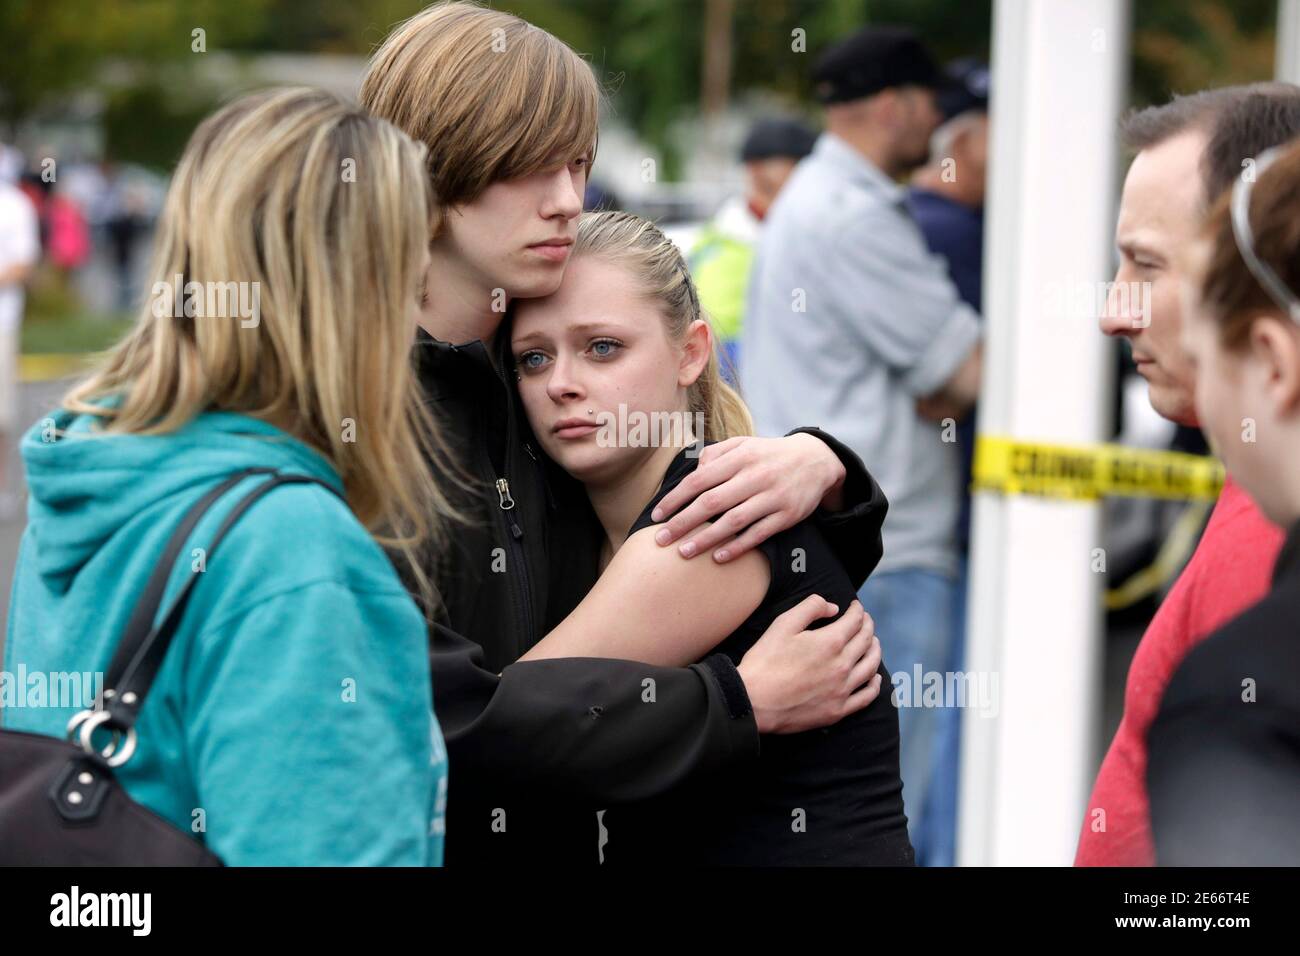 Students and family members reunite at Shoultes Gospel Hall after a student opened fire at Marysville-Pilchuck High School in Marysville, Washington October 24, 2014. The student opened fire in the cafeteria of Marysville-Pilchuck High School on Friday, killing a classmate and wounding at least four others before he was killed amid the chaos of students scrambling to safety, authorities said.  REUTERS/Jason Redmond   (UNITED STATES - Tags: CRIME LAW EDUCATION) Stock Photo